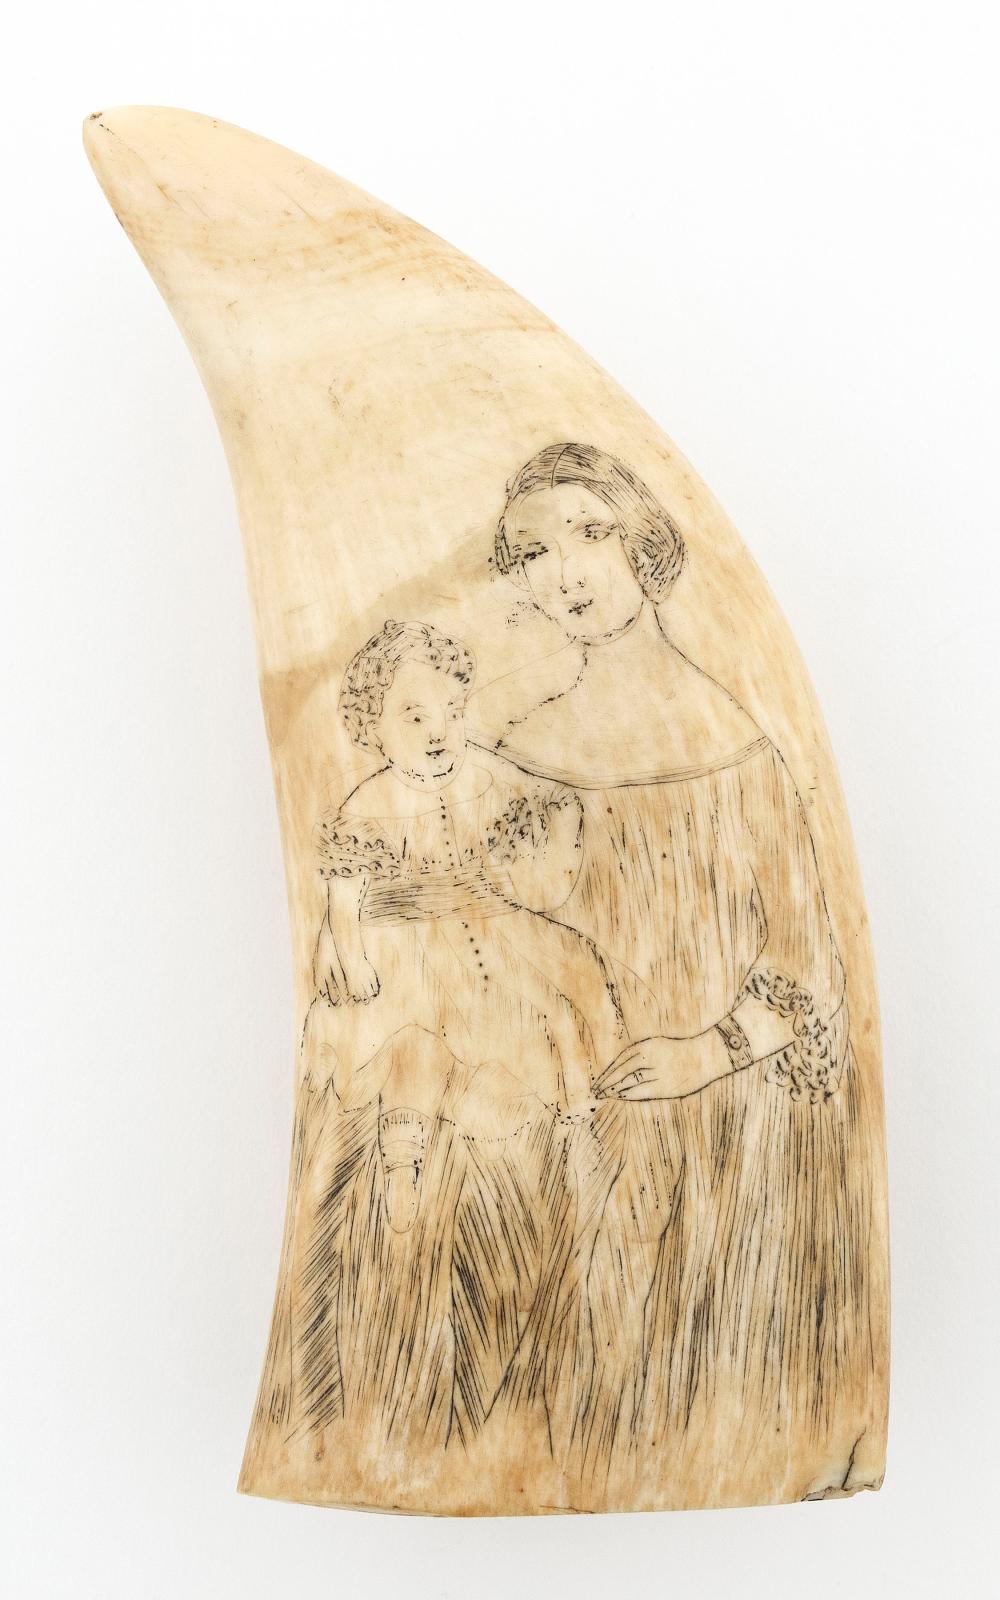 SCRIMSHAW WHALE'S TOOTH 19TH CENTURY